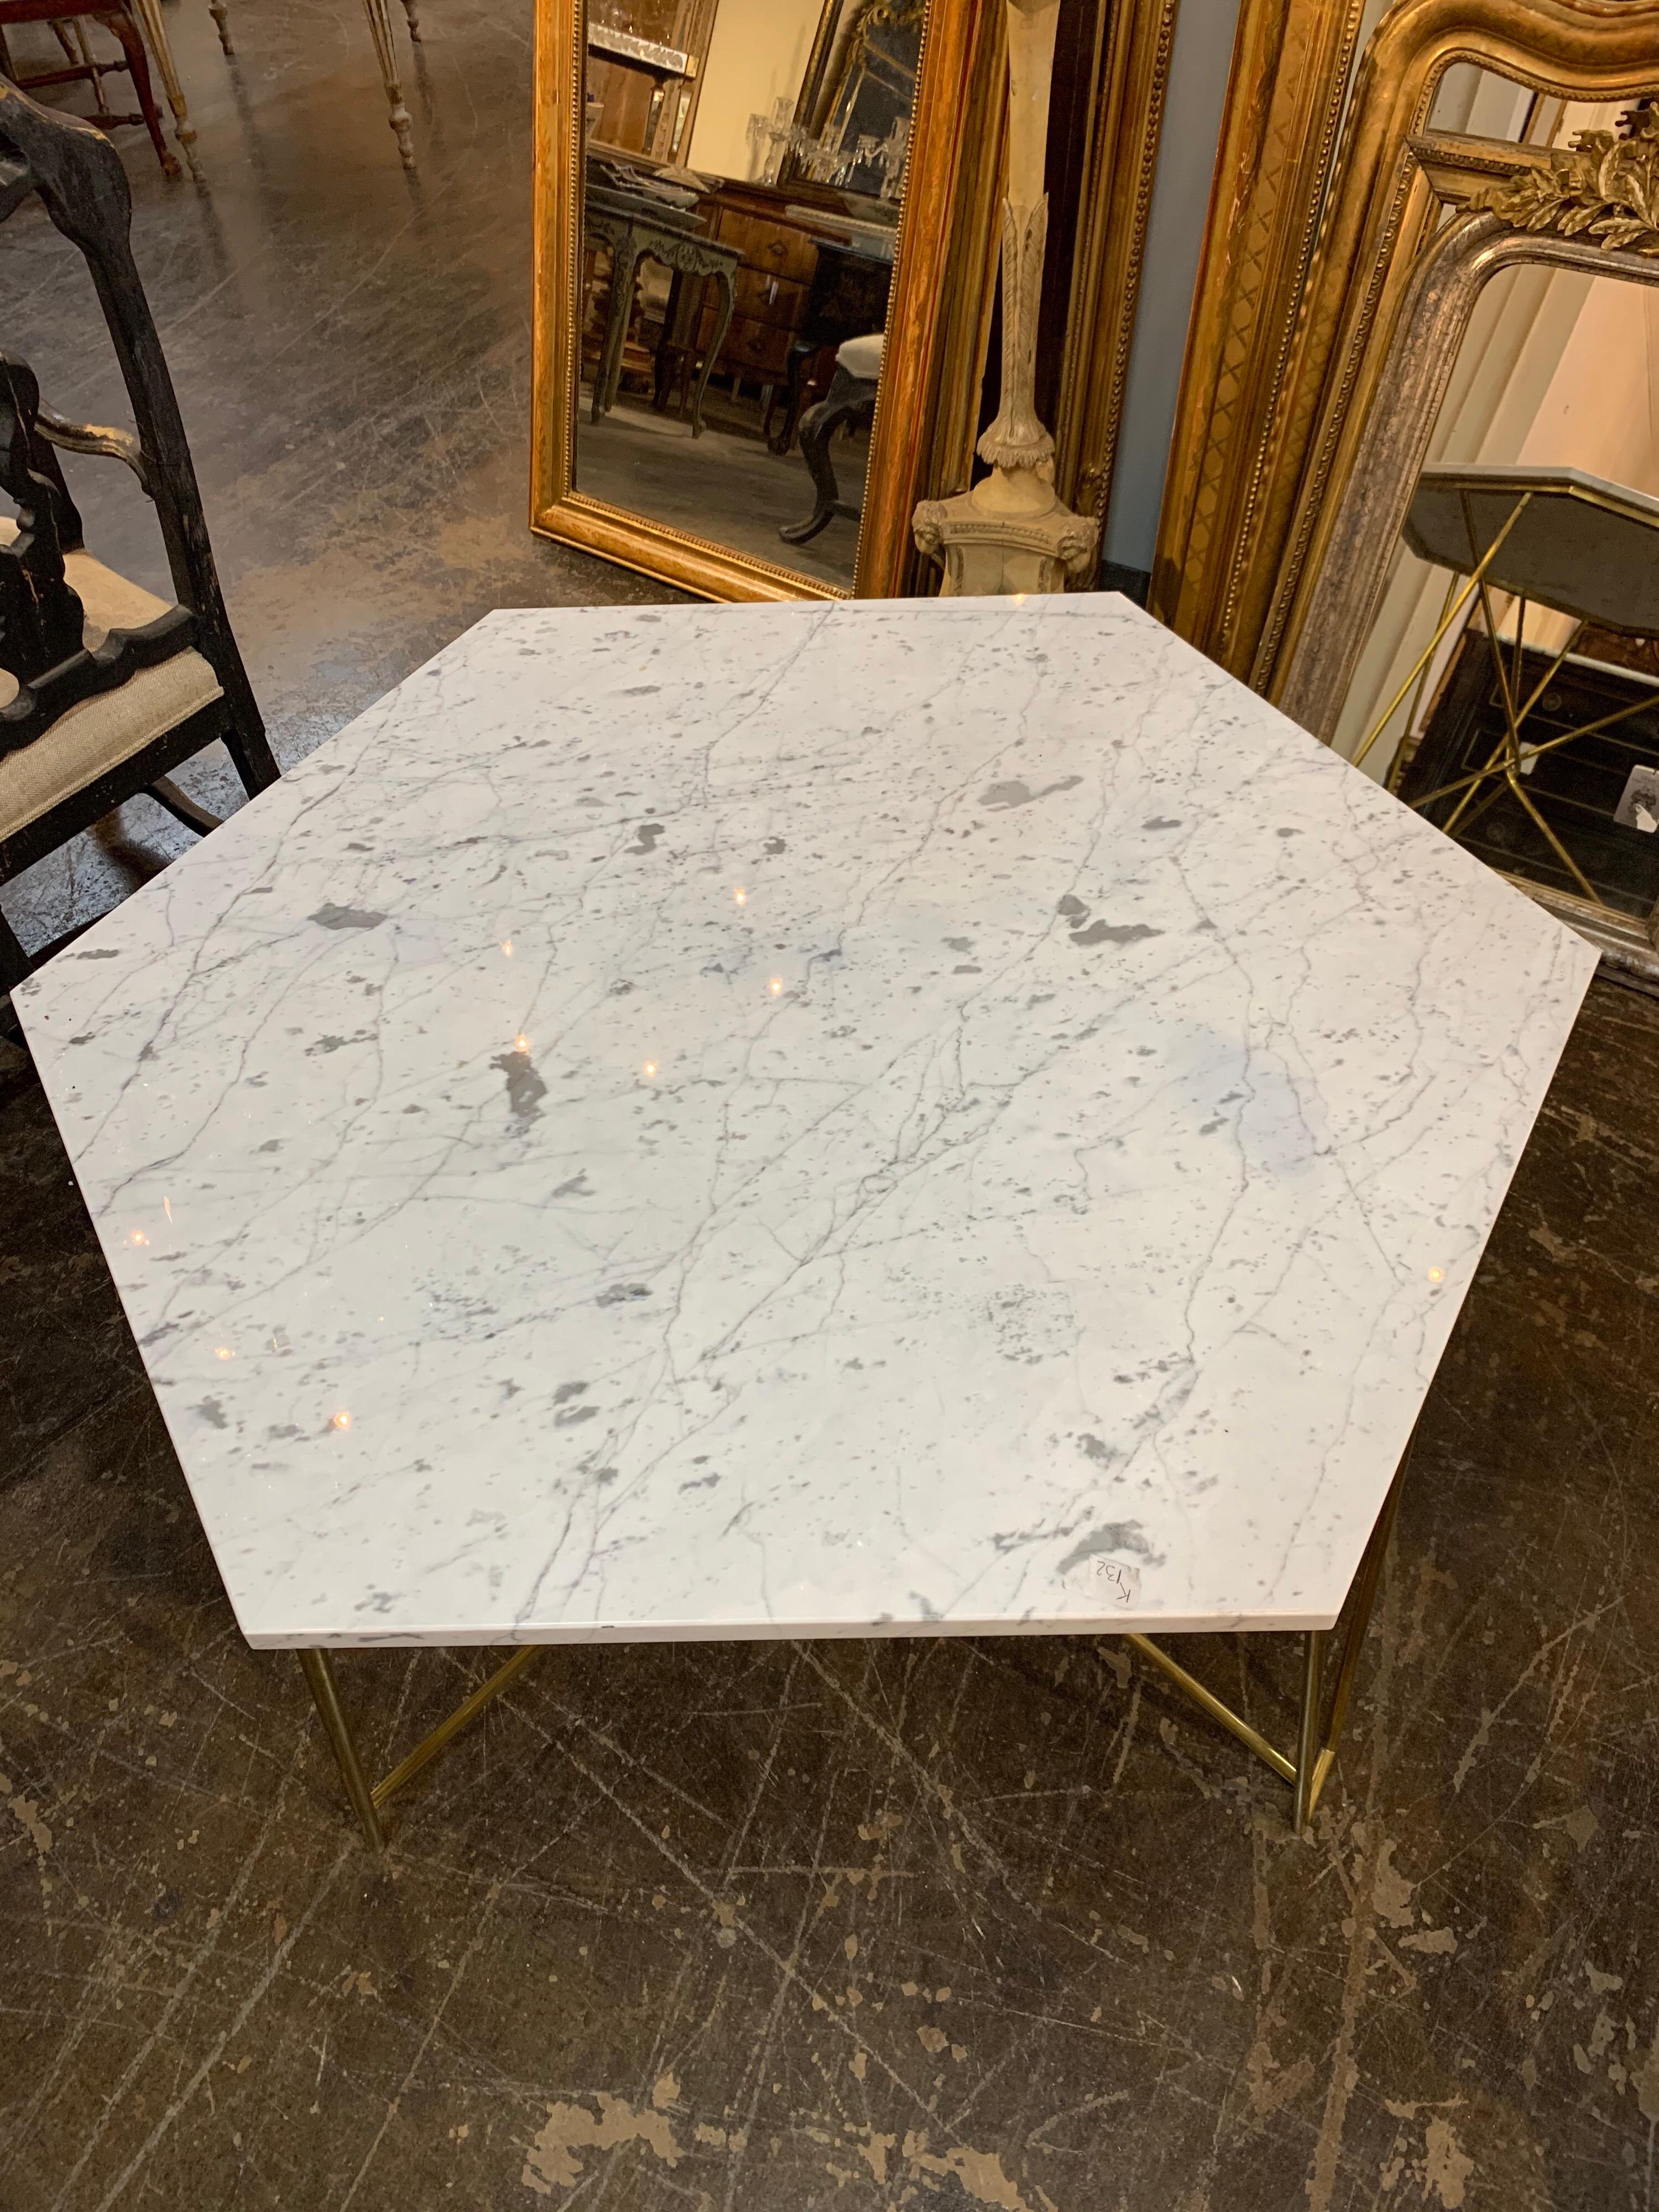 Very sleek Italian midcentury brass hexagonal center table with Carrara marble top. 
The base has interesting intertwined legs and the top is gorgeous. Better hurry. This one won't last long!